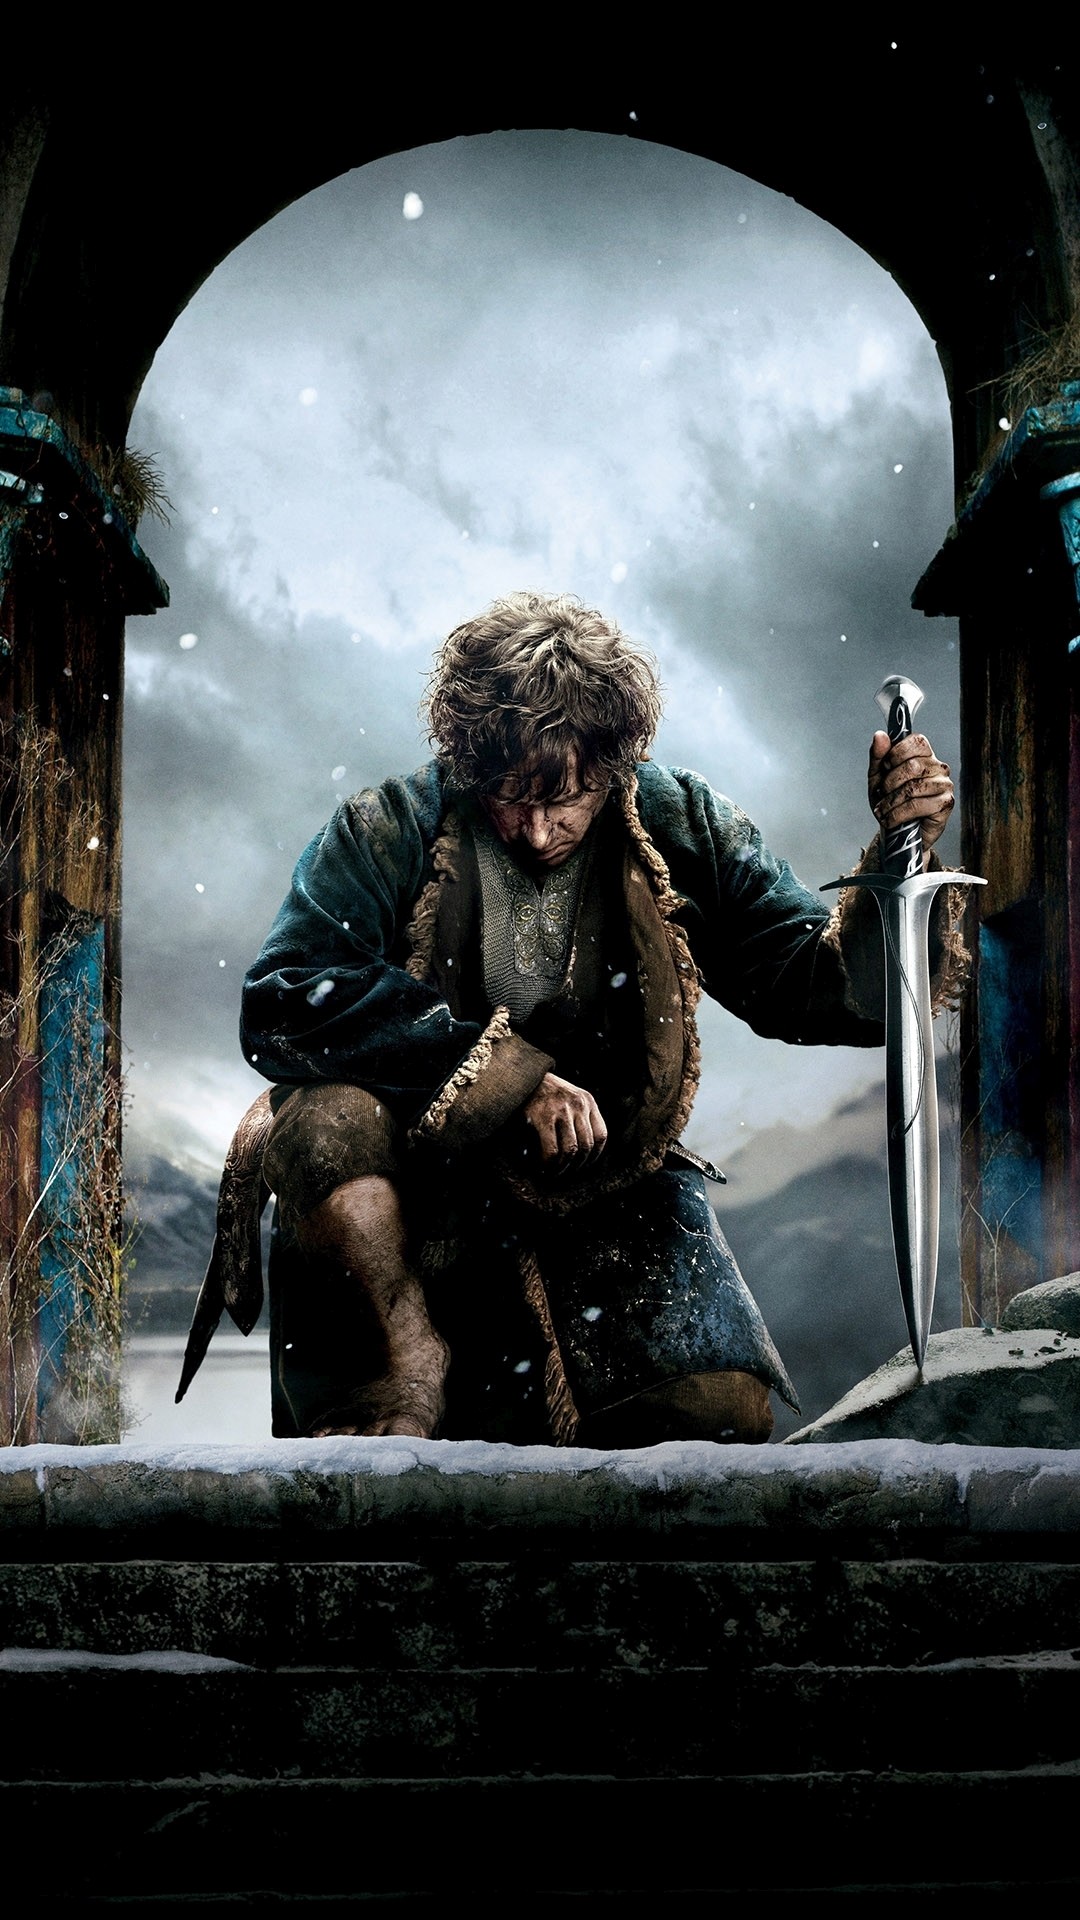 1080x1920 Bilbo with a sword in The Hobbit: The Desolation of Smaug Wallpaper